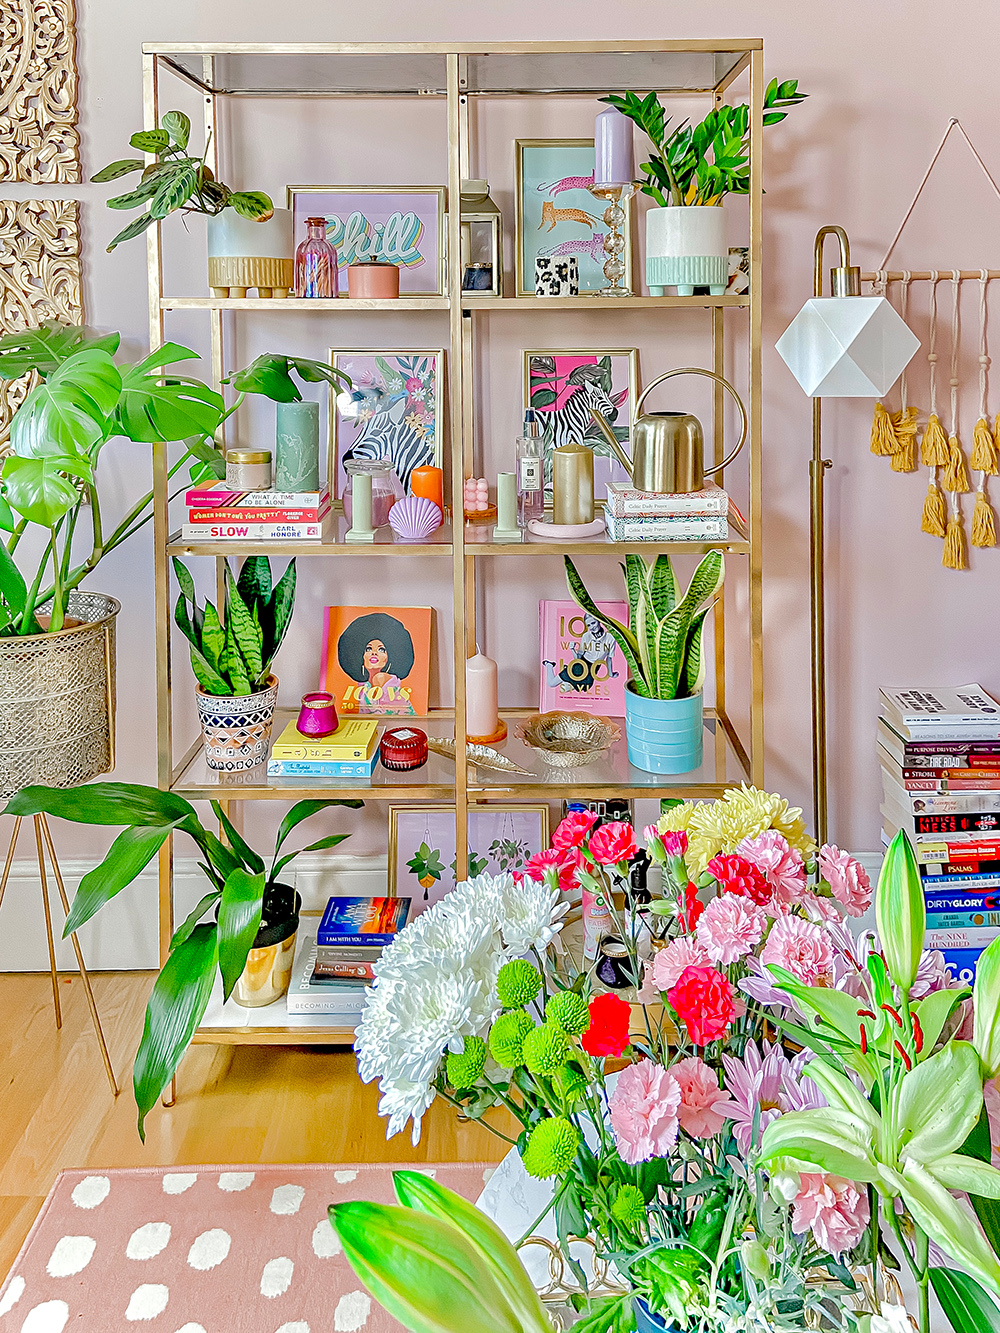 Shelf styling inspiration with lots of house plants, quirky home accessories, and colourful art prints